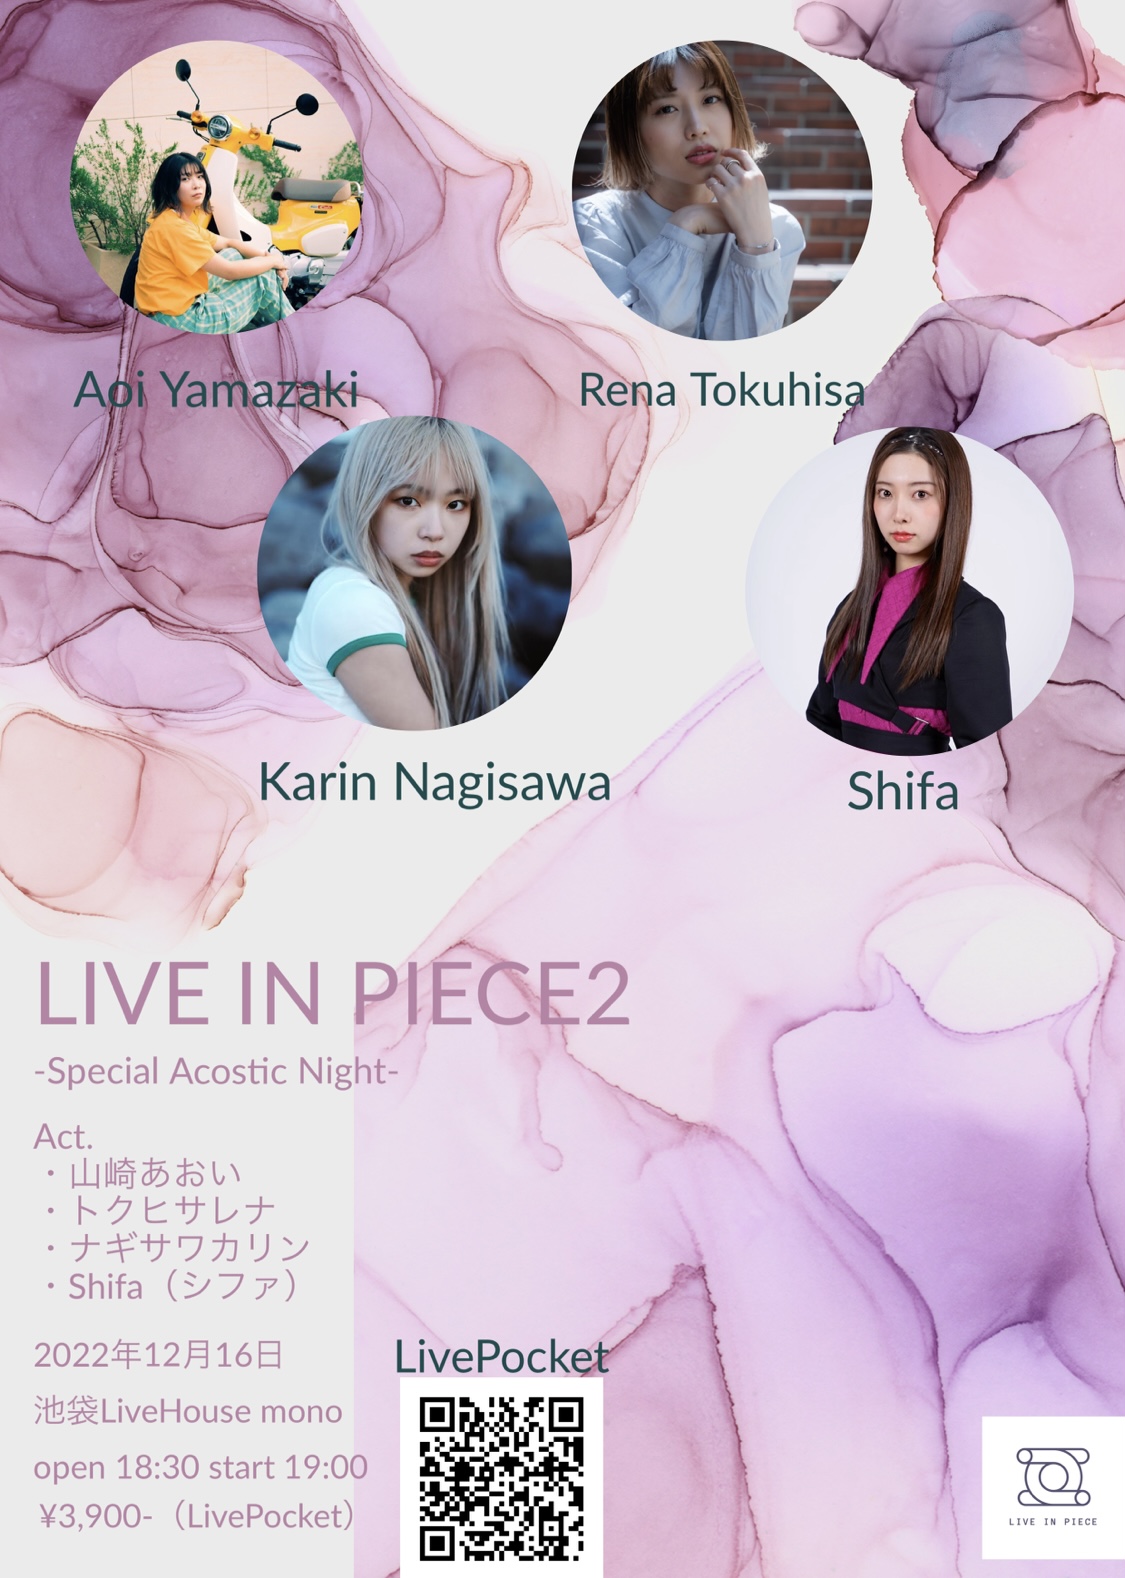 LIVE IN PIECE2〜Special Acostic Night〜